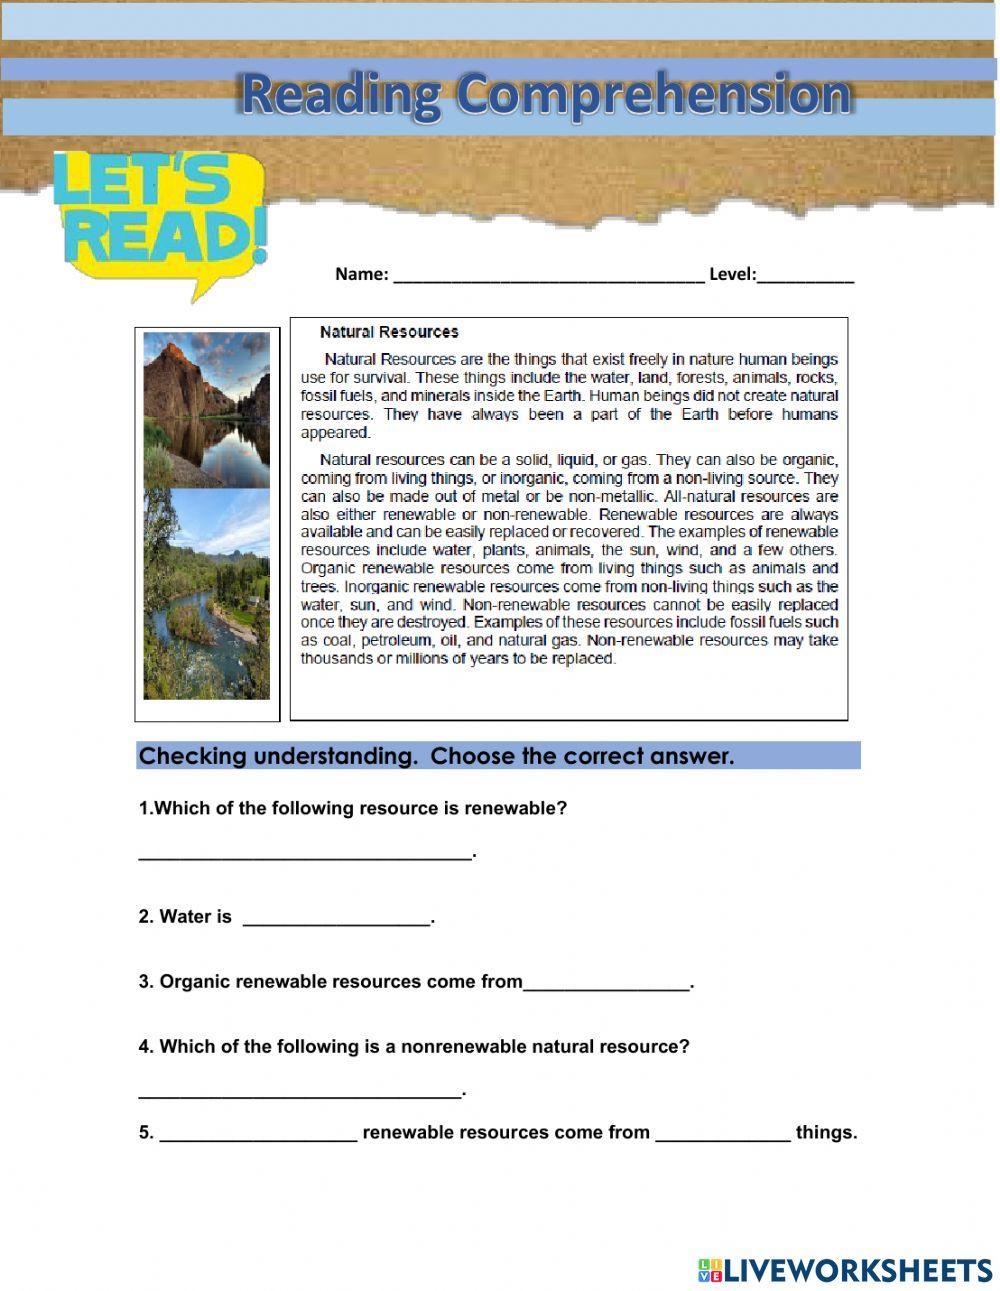 Reading Comprehension: Natural Resources